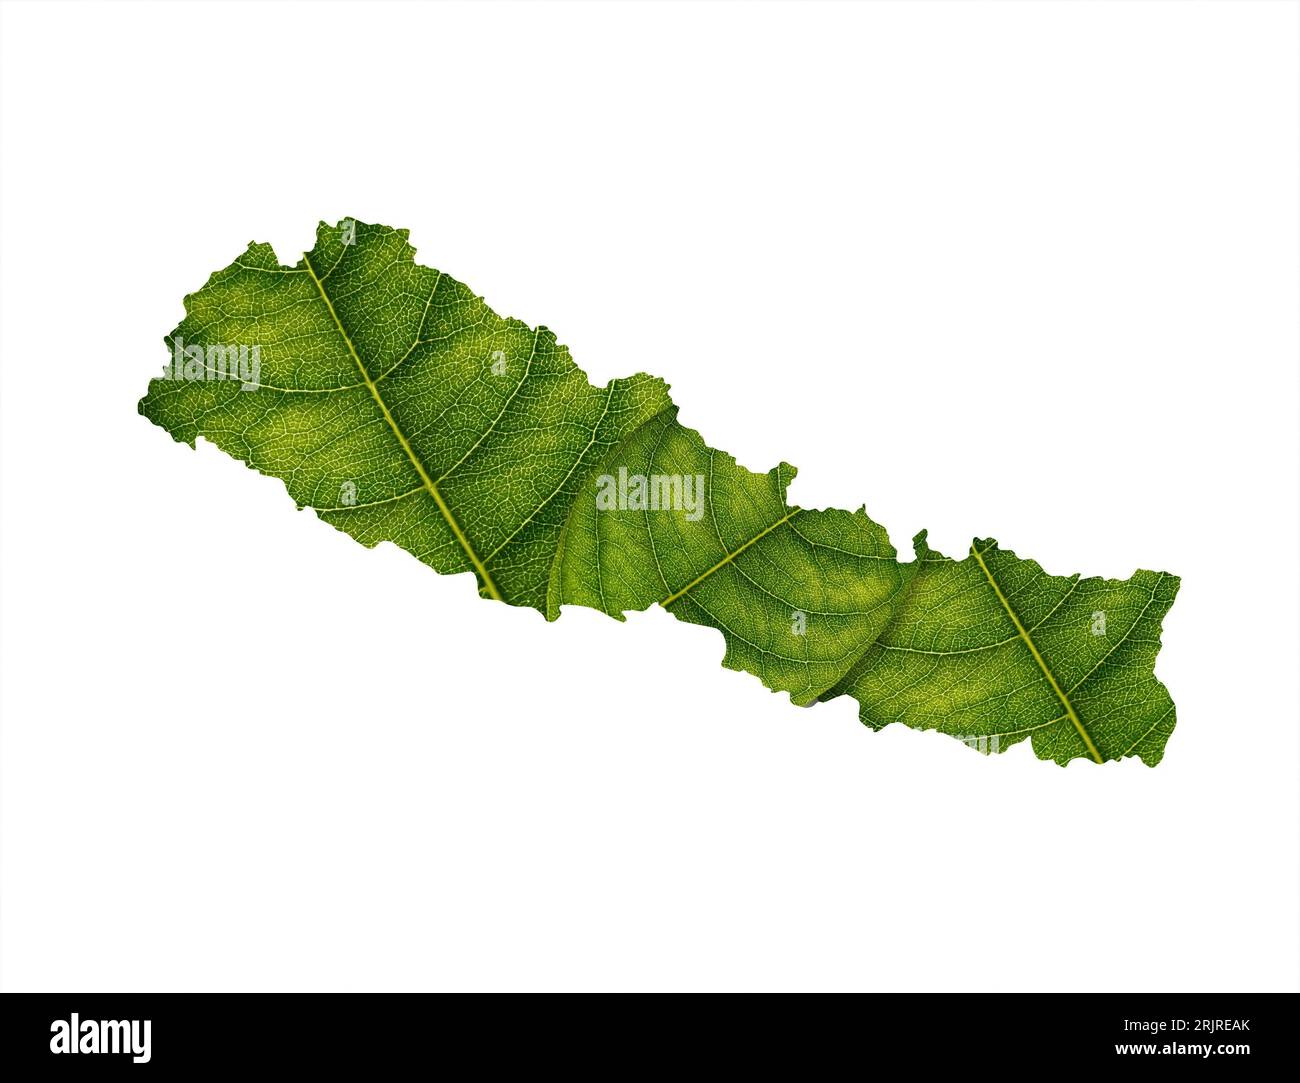 An illustration of Nepal map made of green leaves on a white background Stock Photo